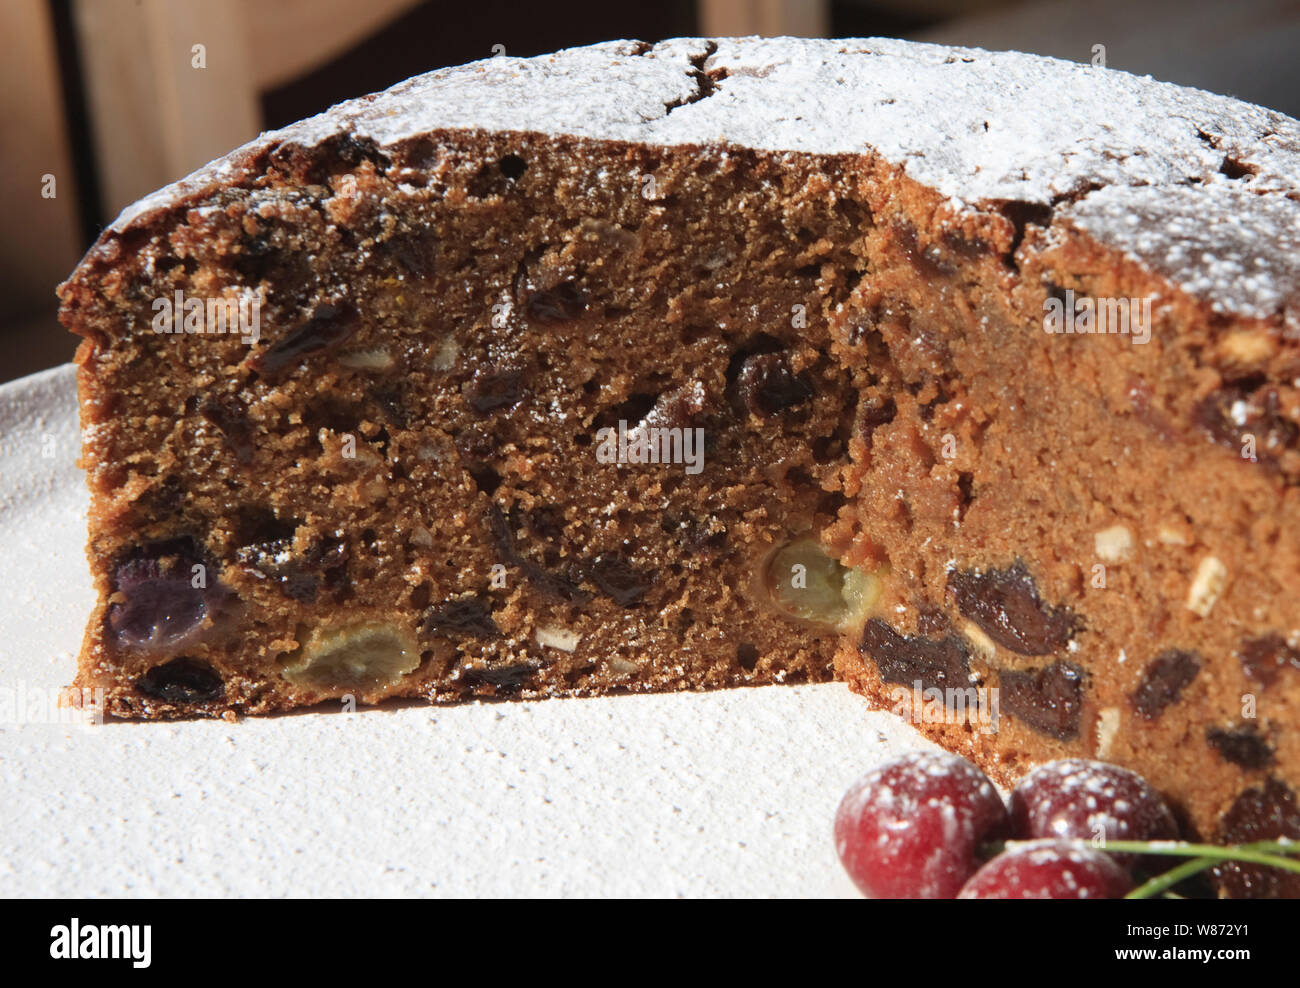 freshly baked fruit and nut cake dusted with icing sugar Stock Photo